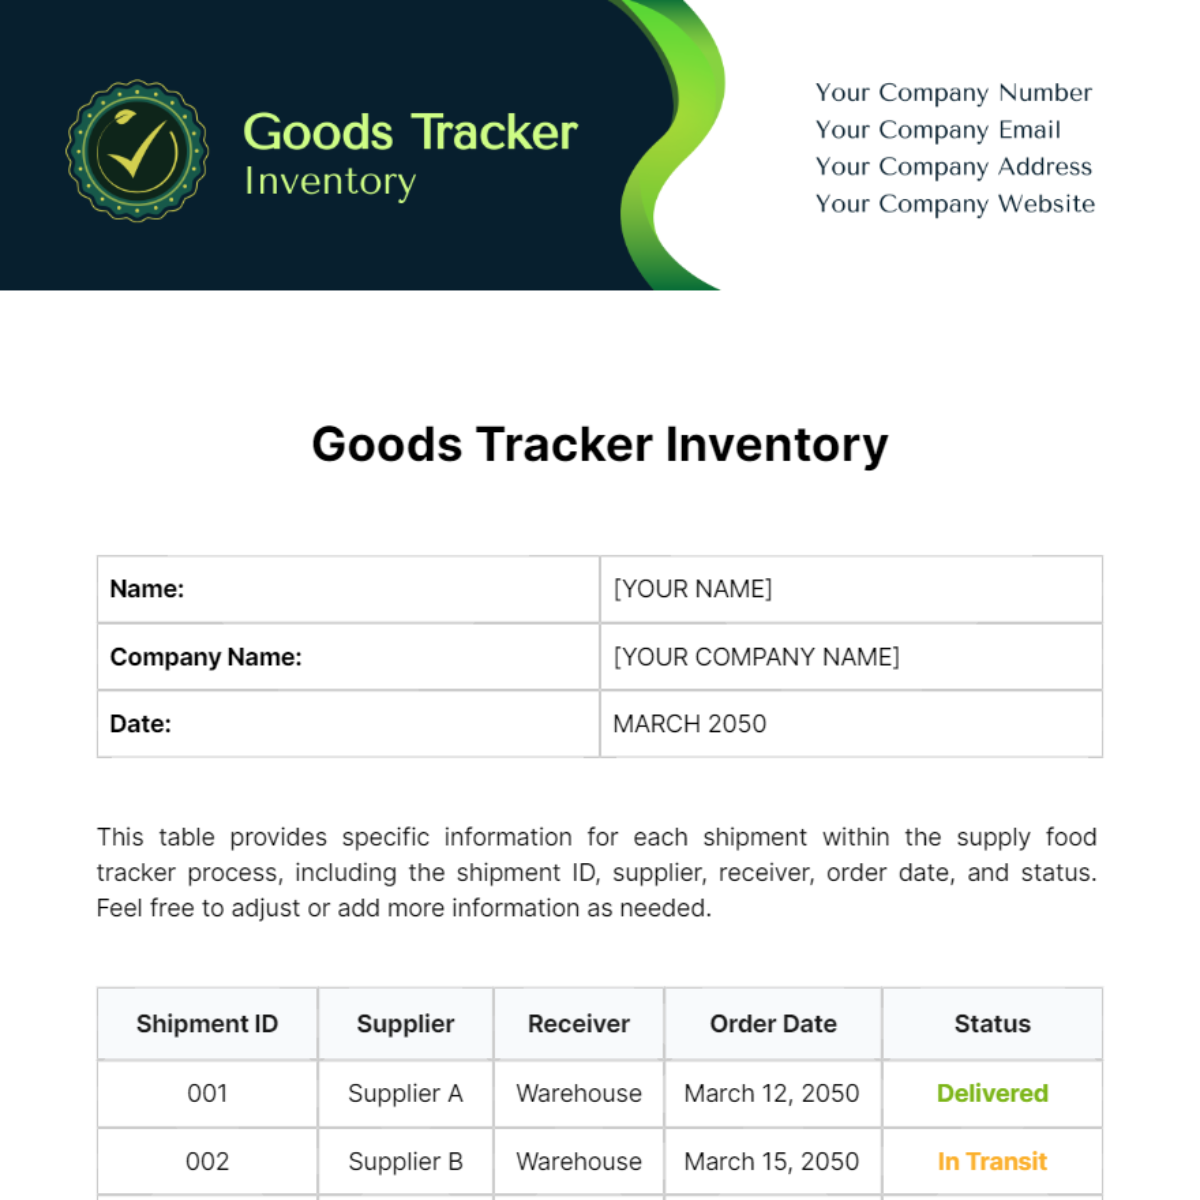 Free Goods Tracker Inventory Template